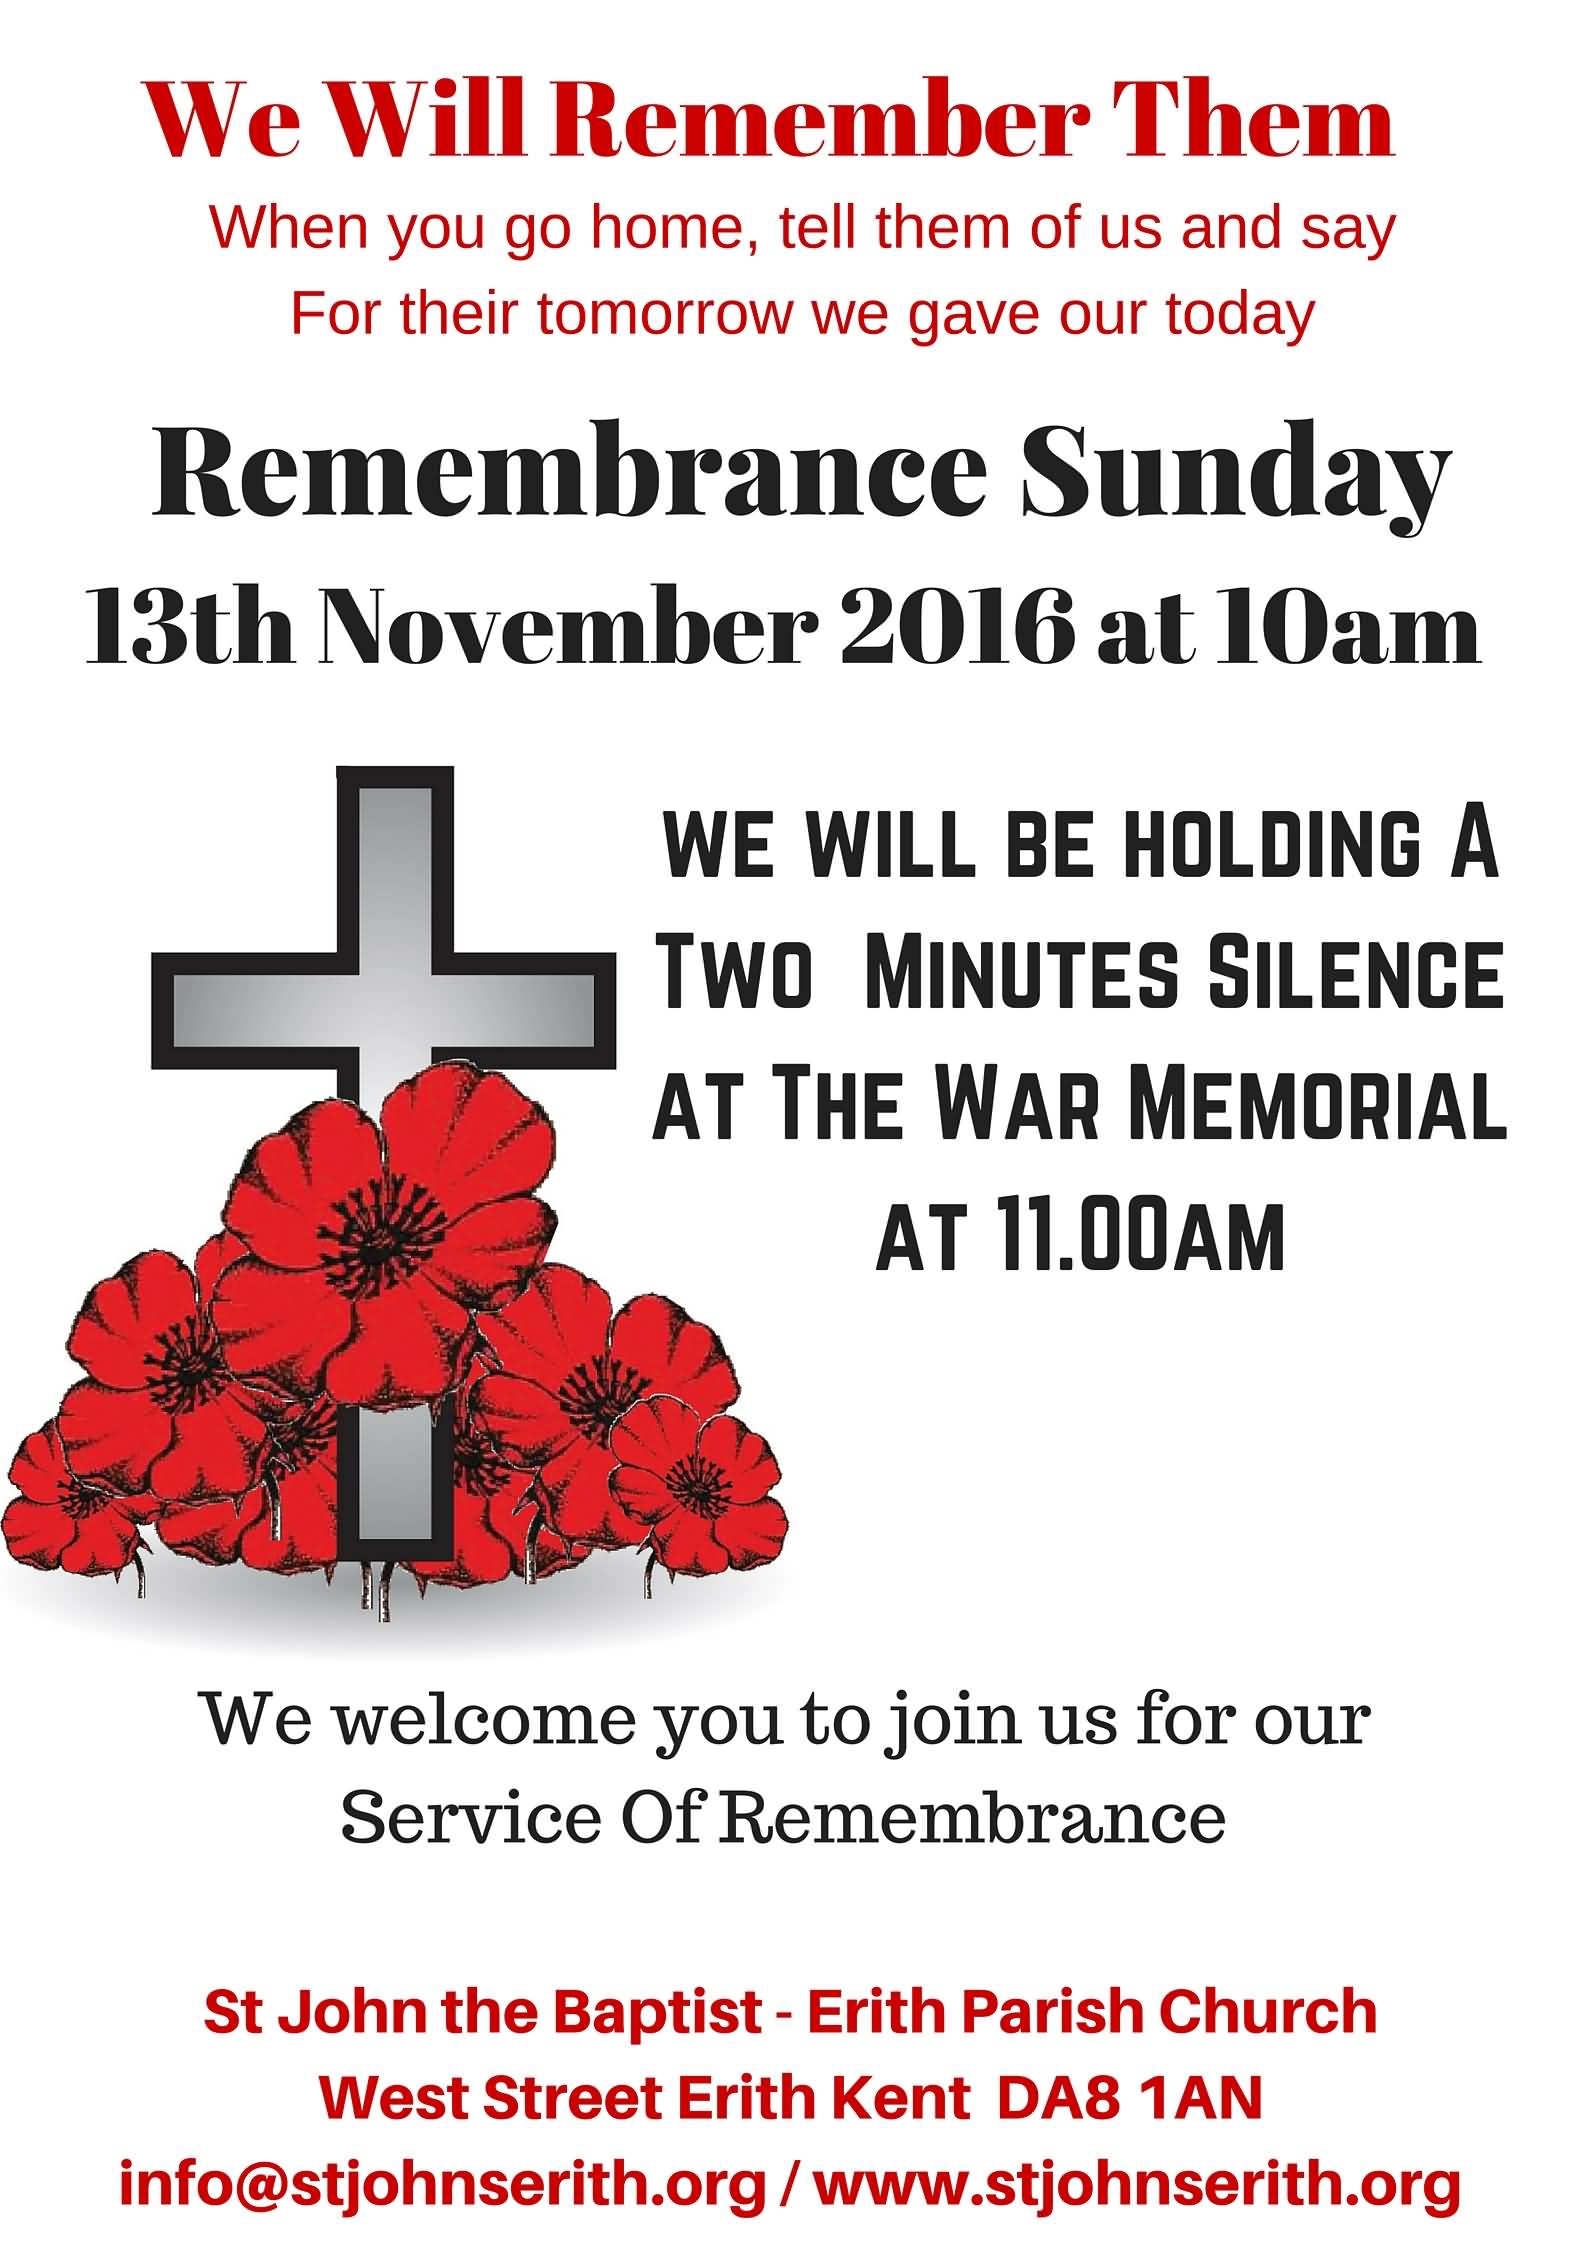 We Will Remember Them On Remembrance Sunday